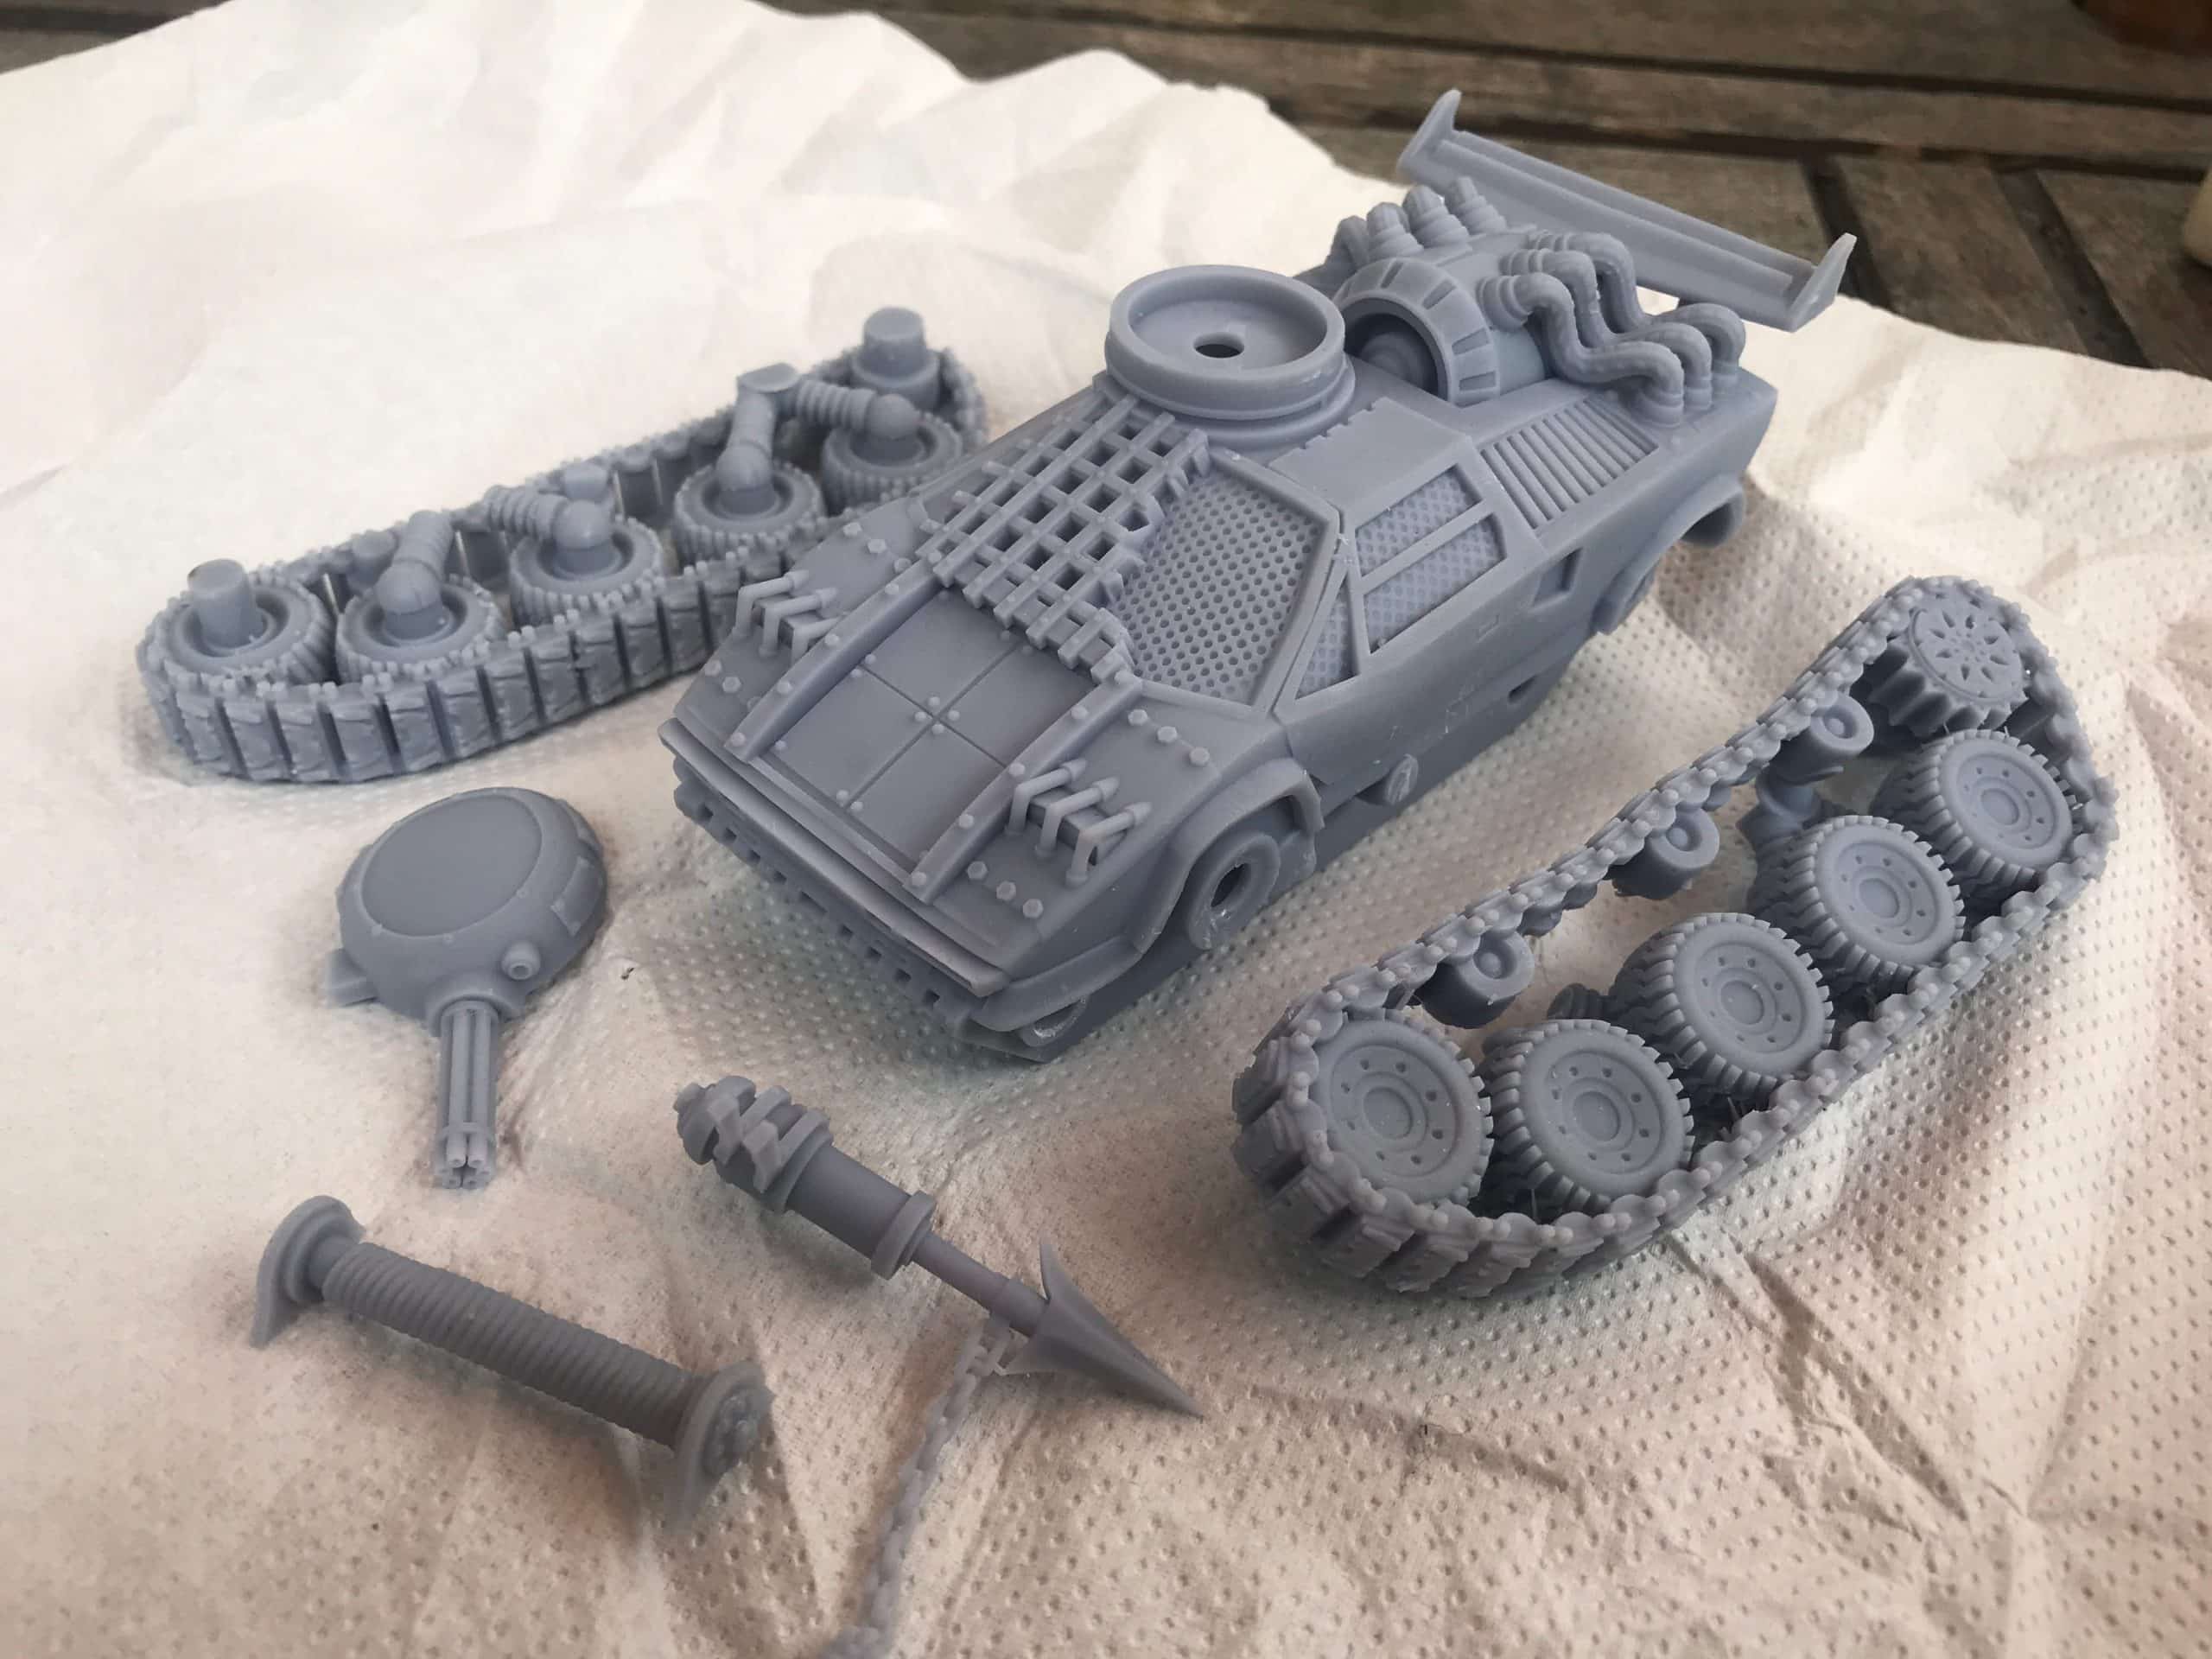 Making Minis! Check out this fantastic Lambo Tank designed by Across the Realms and manufactured by us here at ForMySin Designs